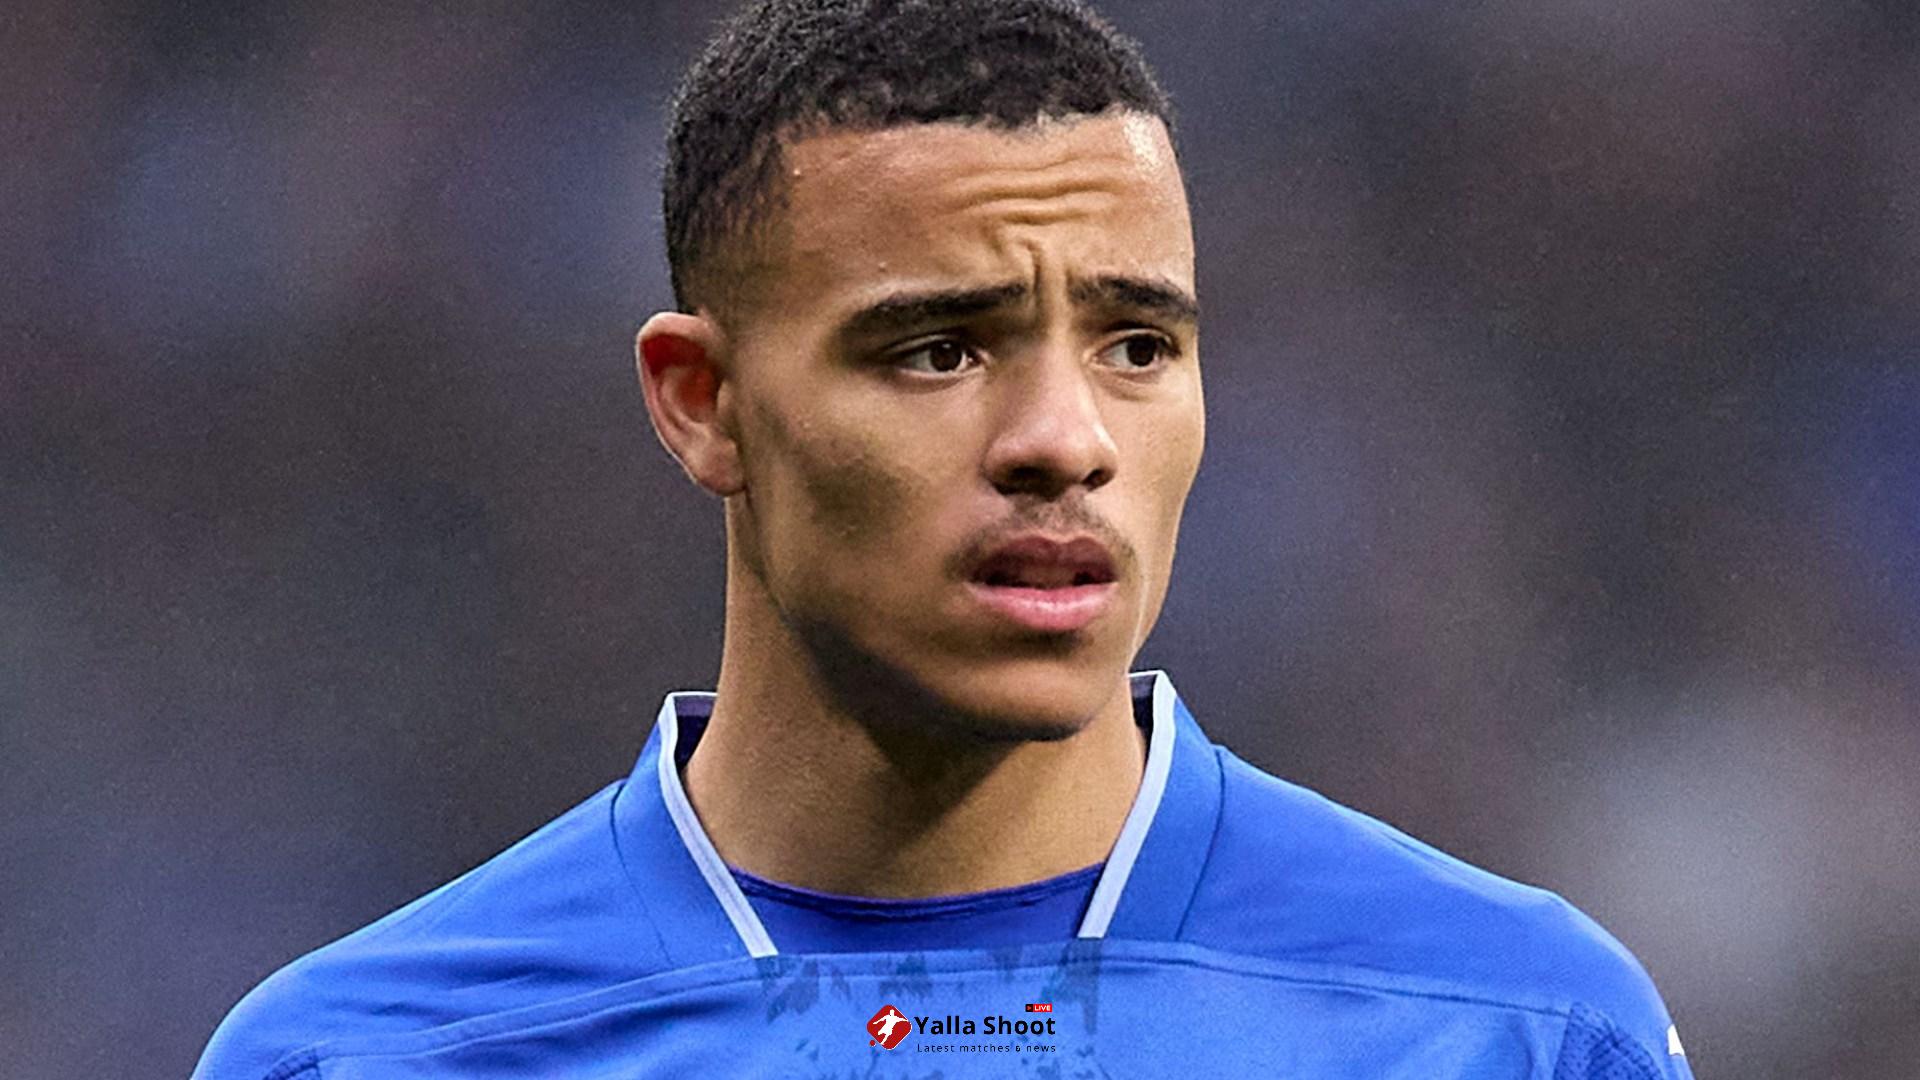 On-loan Man Utd striker Mason Greenwood trolled by Sevilla for Getafe loss as fans say 'I thought it was parody account'